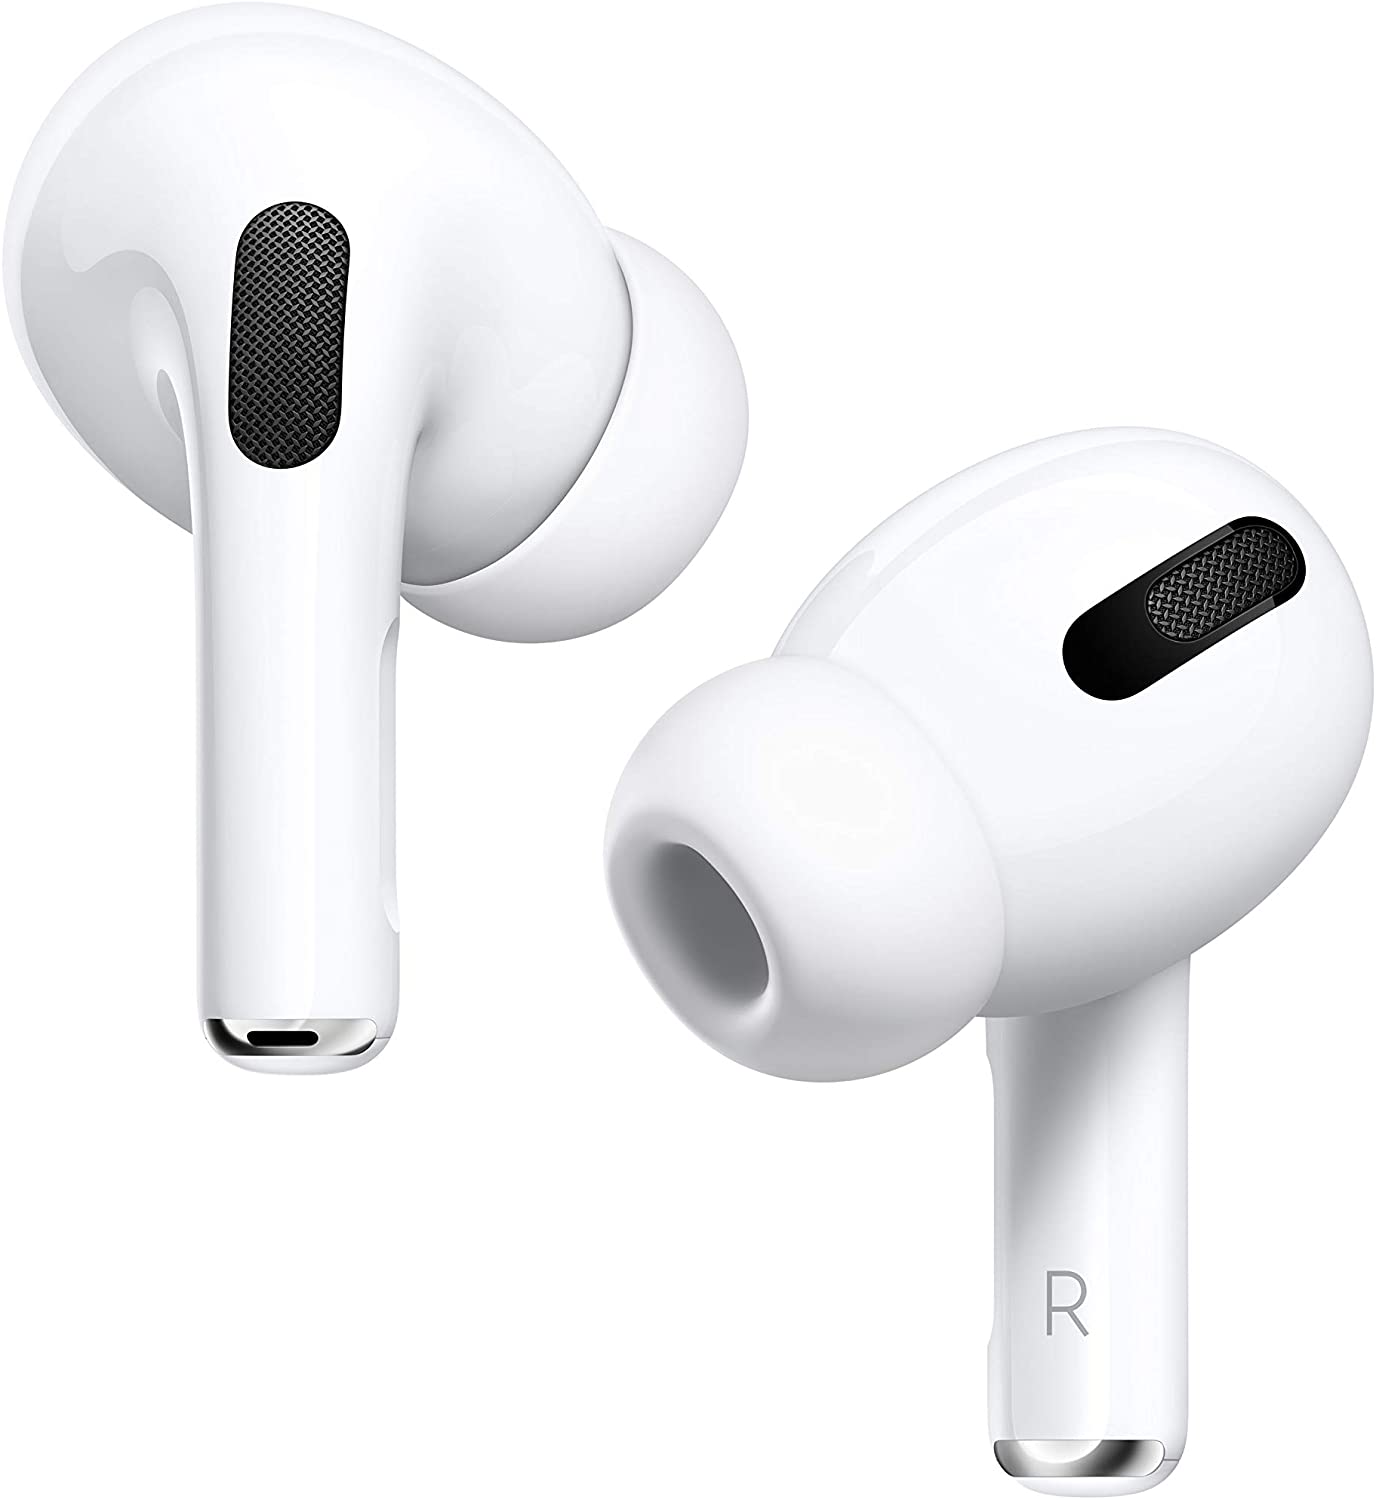 Apple AirPods Pro Wireless Earbuds with MagSafe Charging Case. Active Noise Cancelling, Transparency Mode, Spatial Audio, Customizable Fit, Sweat and Water